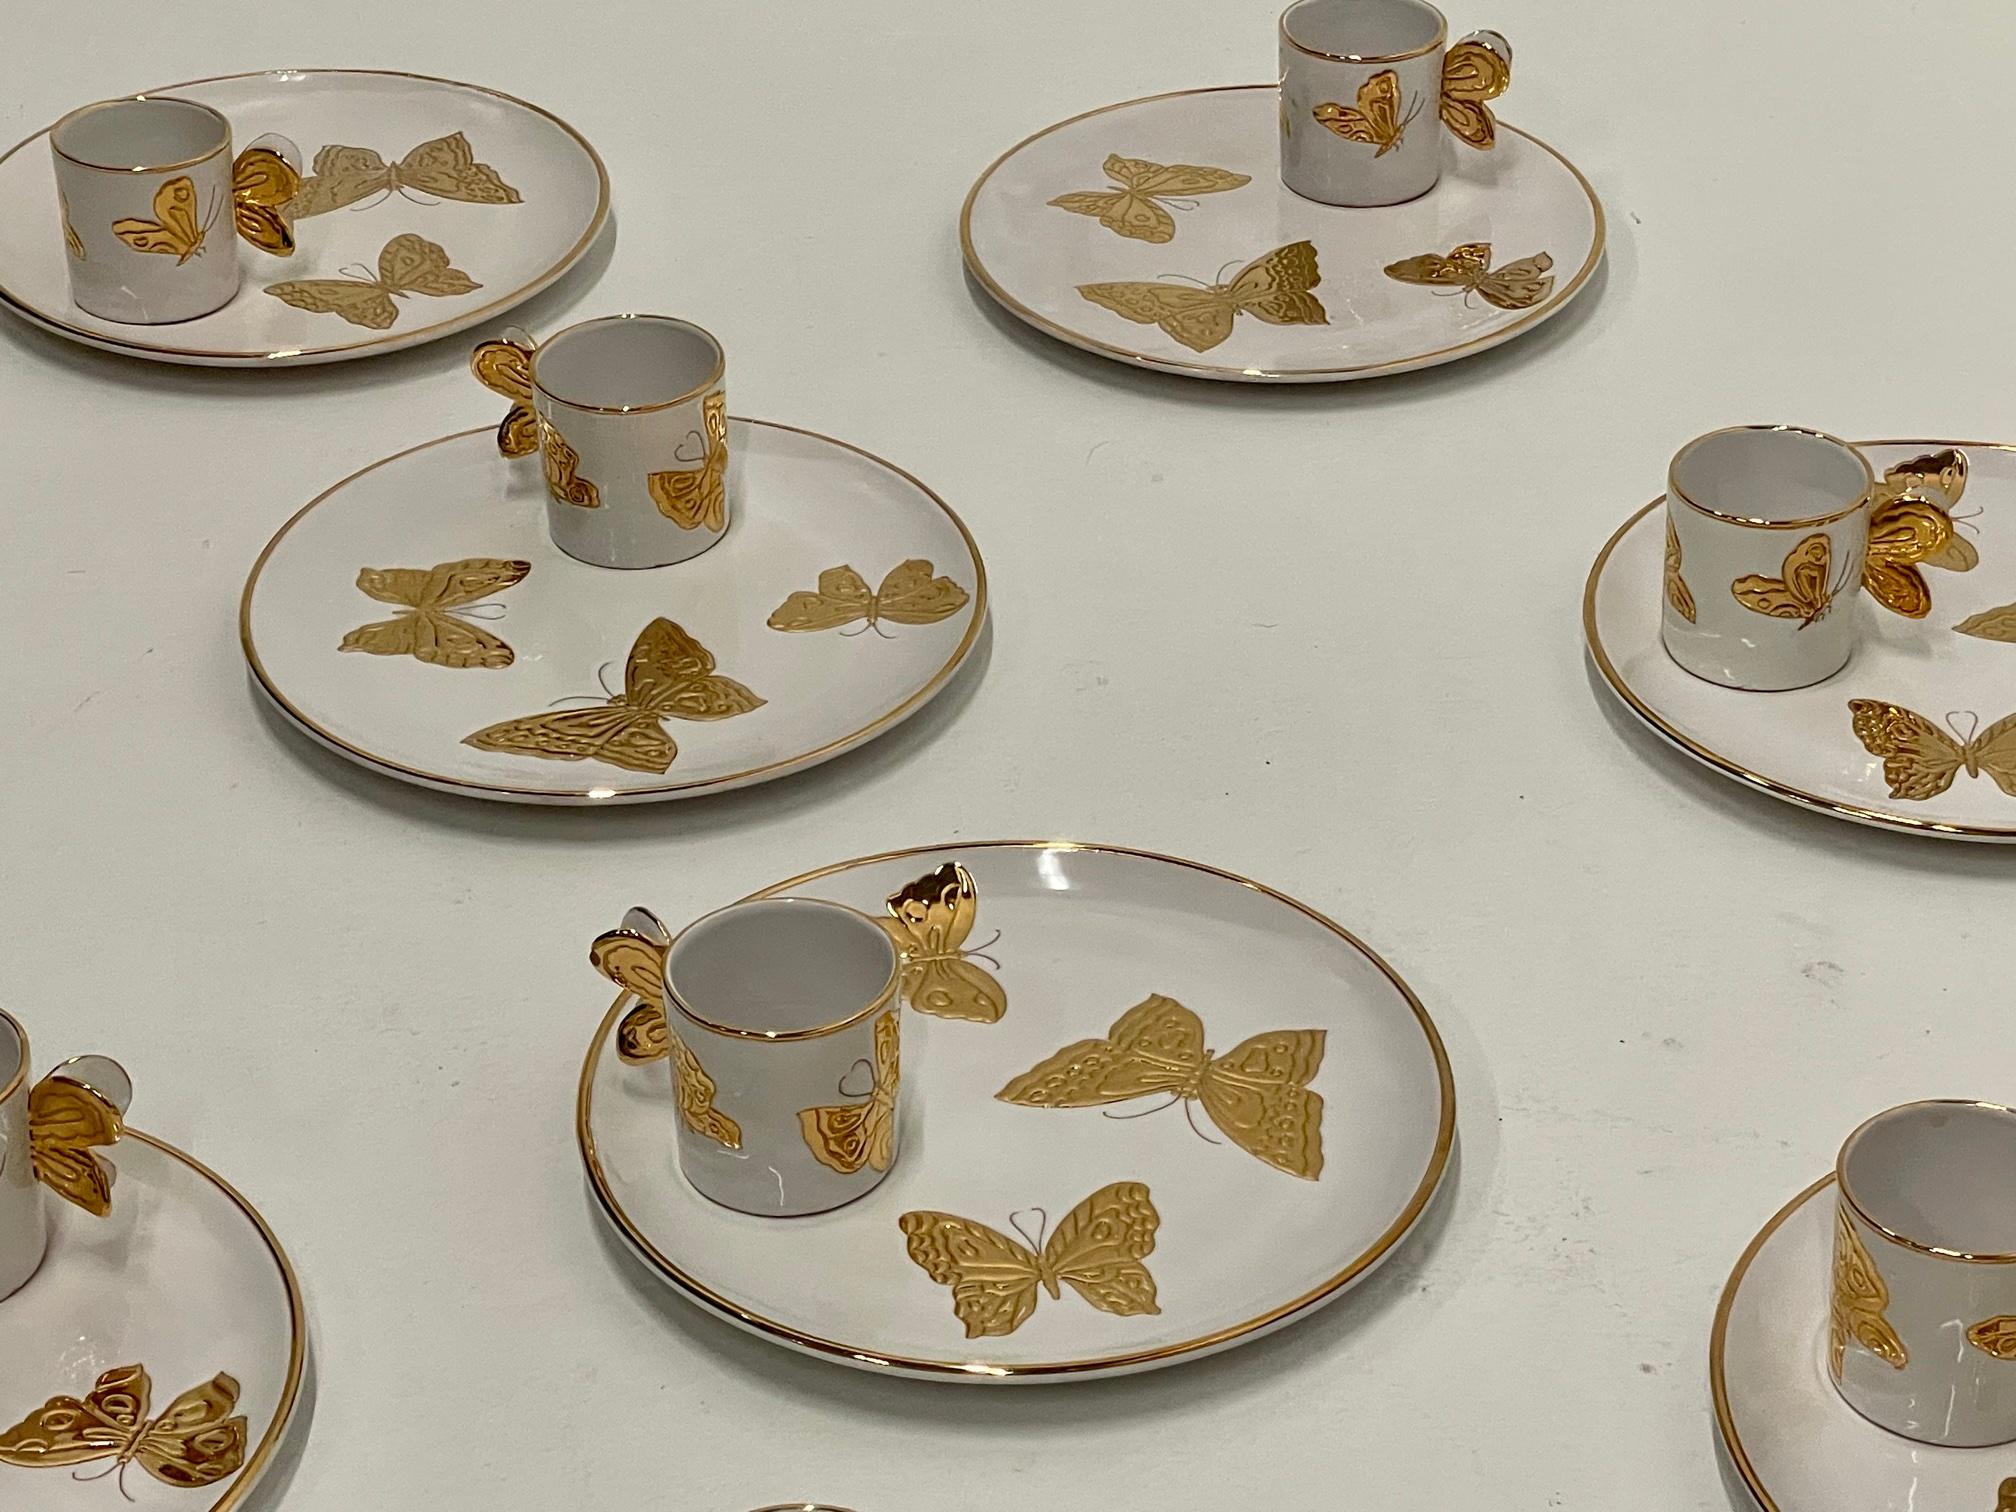 Marvelous set of 12 Carole Stupell Italian white pottery plates having gold butterfly adornments and matching cups that rest in slightly recessed circles. The cups have whimsical butterfly shaped handles.
Plates are 11